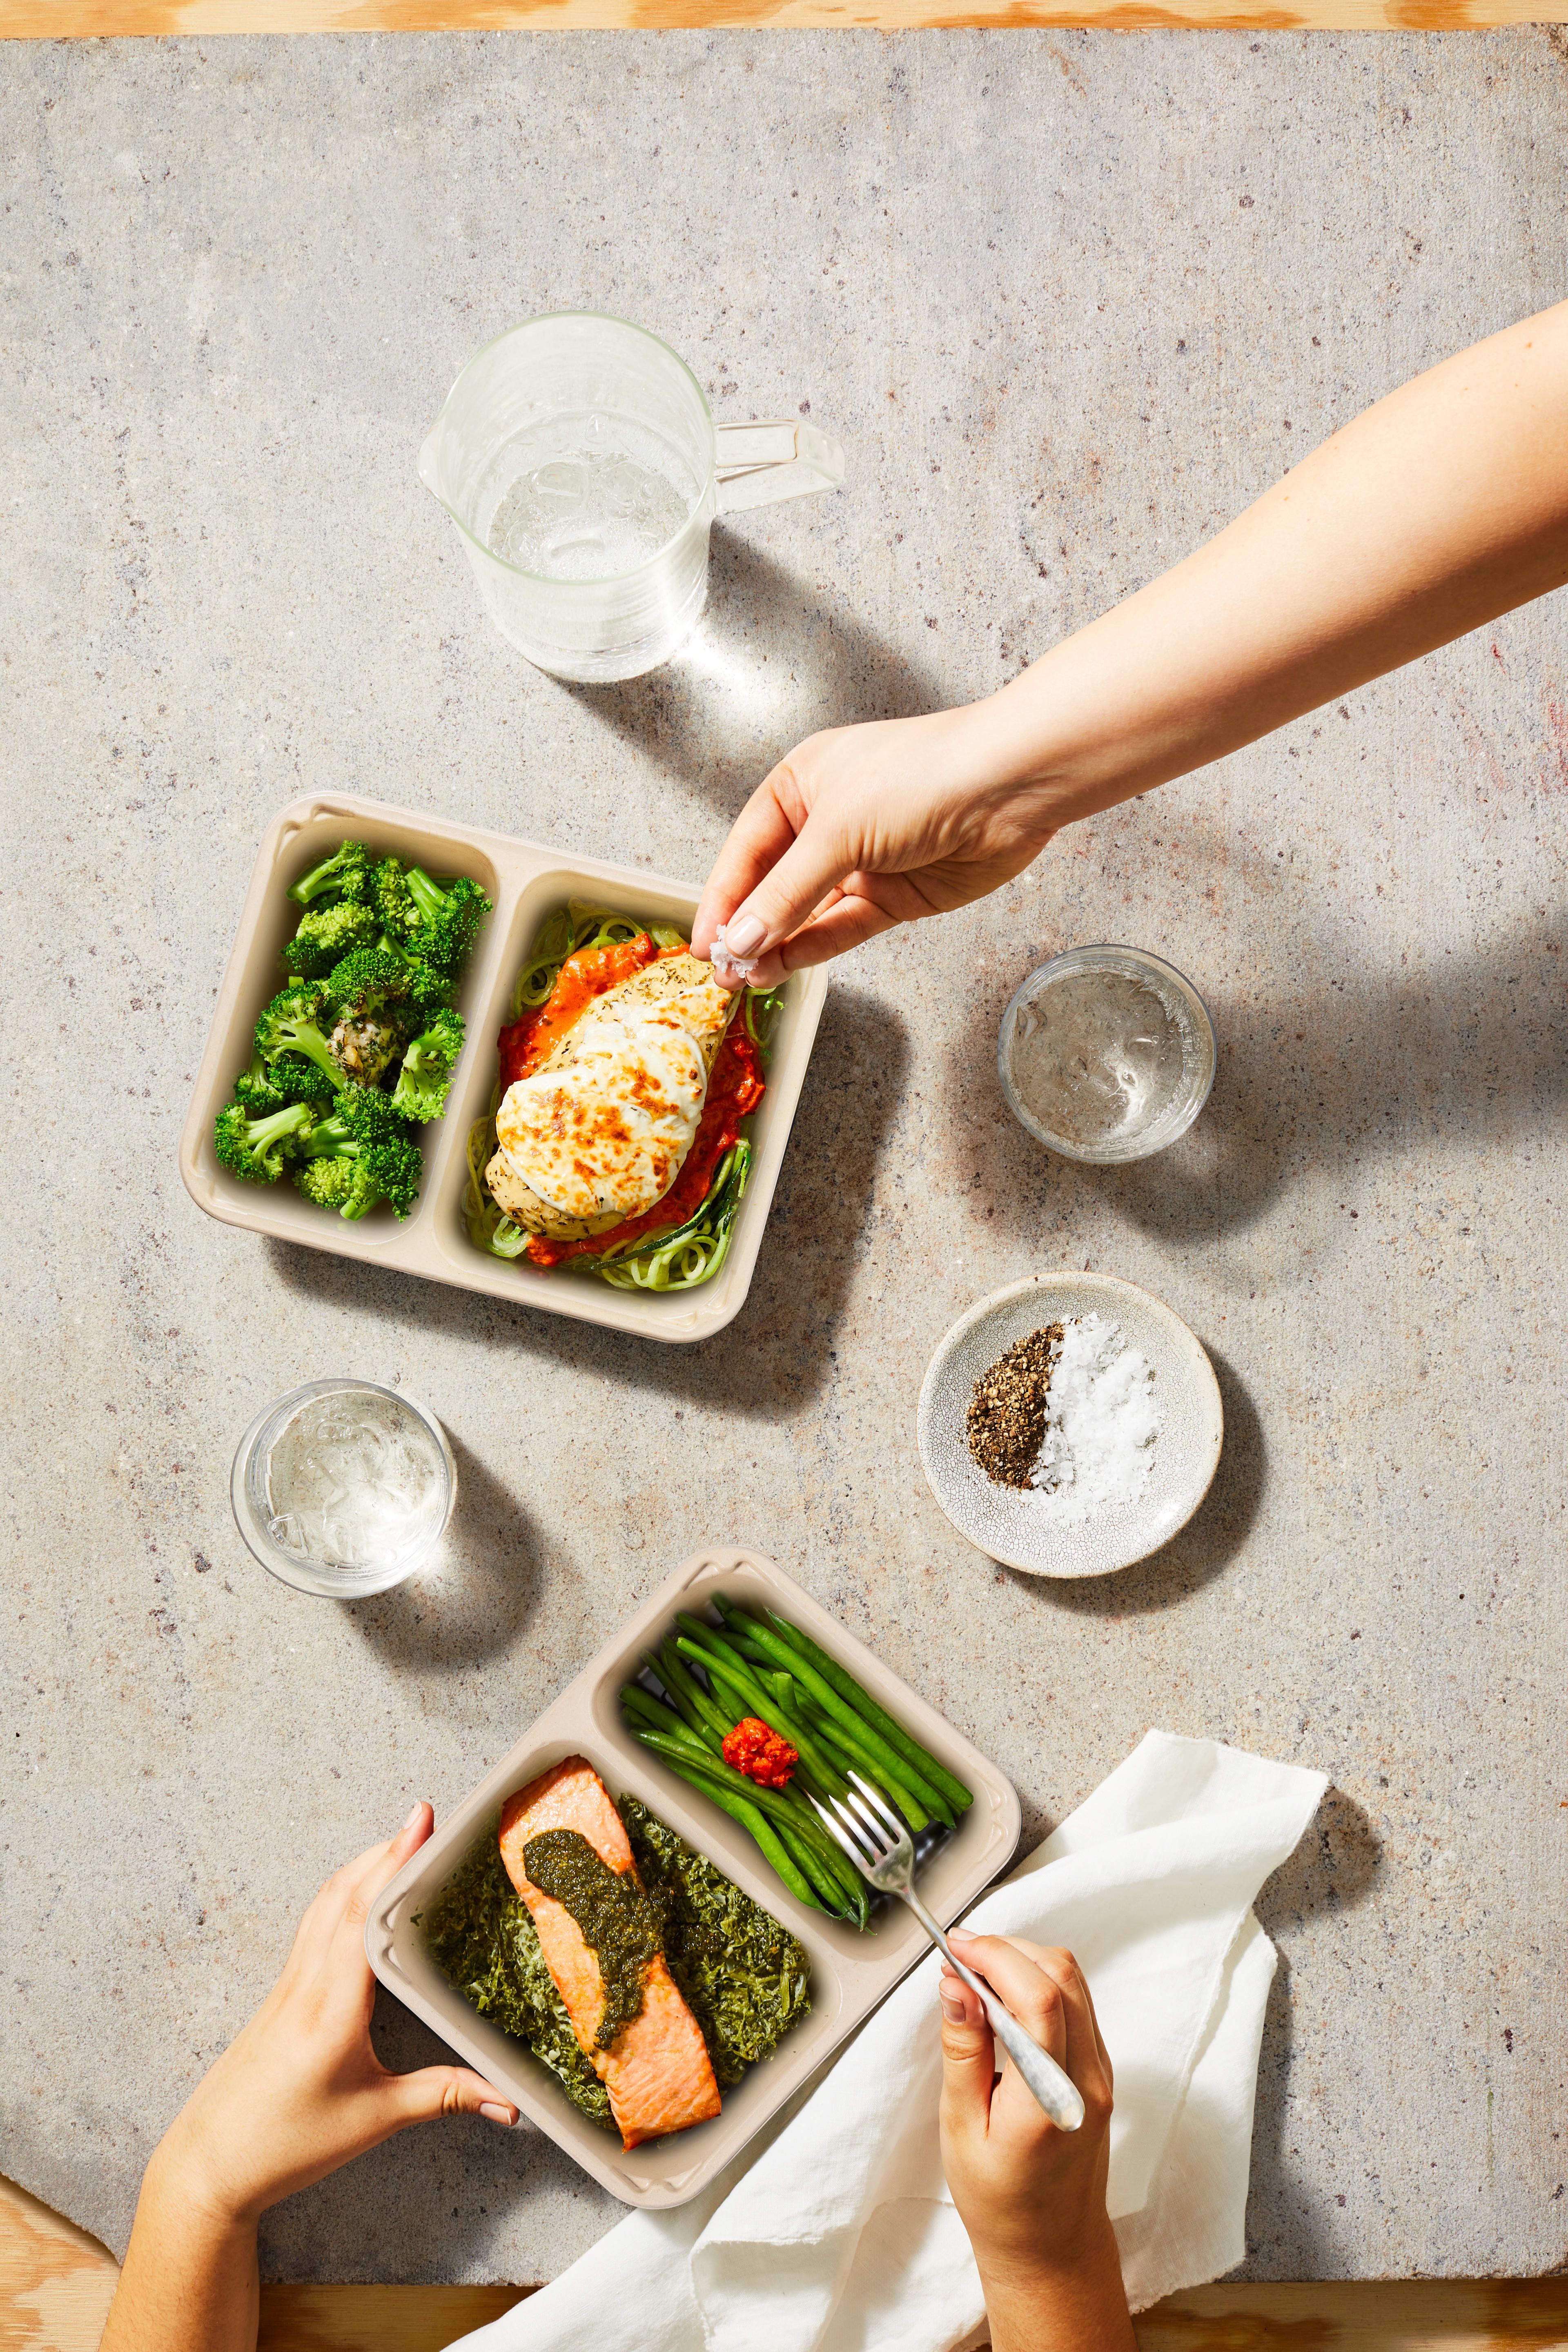 <h2>What are the benefits of Factor Meal Plans?</h2>